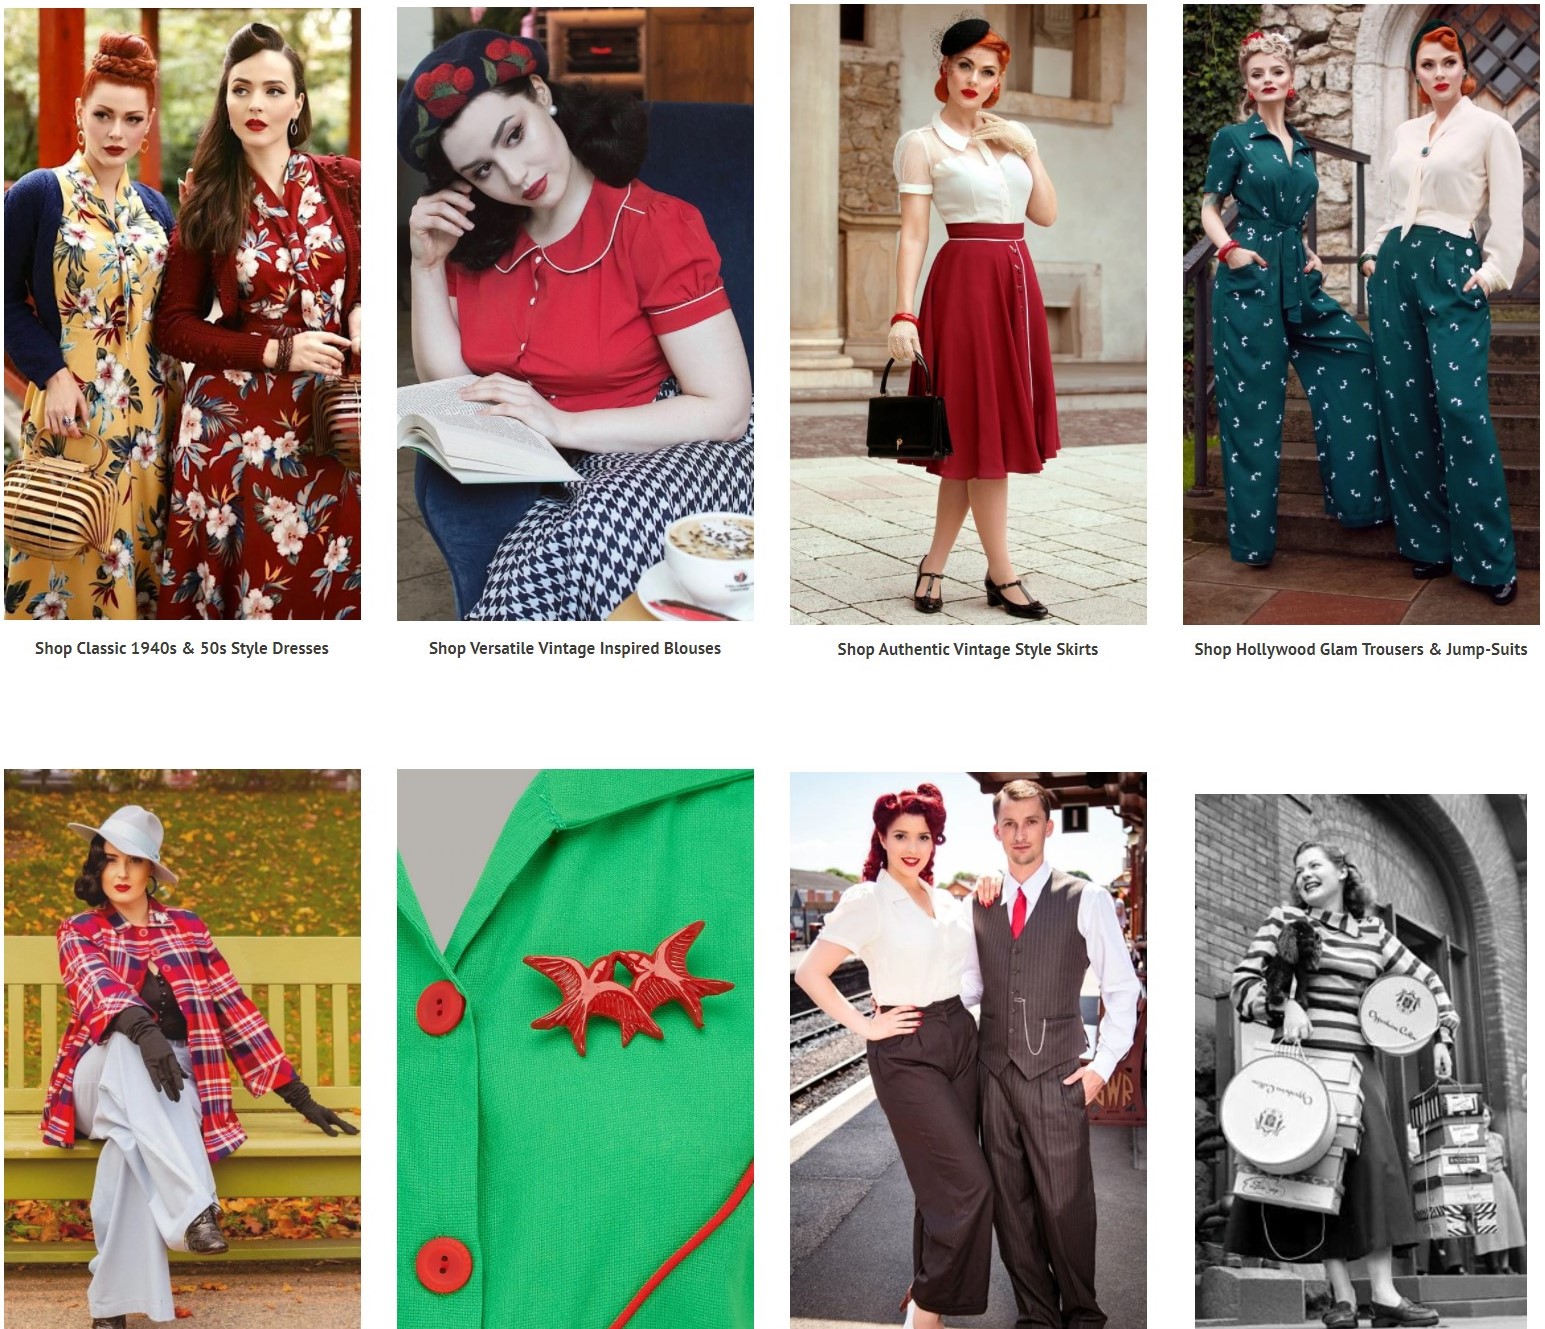 1950s Dresses & Skirts: Styles, Trends & Pictures  Vintage dresses,  Vintage fashion 1950s, Vintage outfits